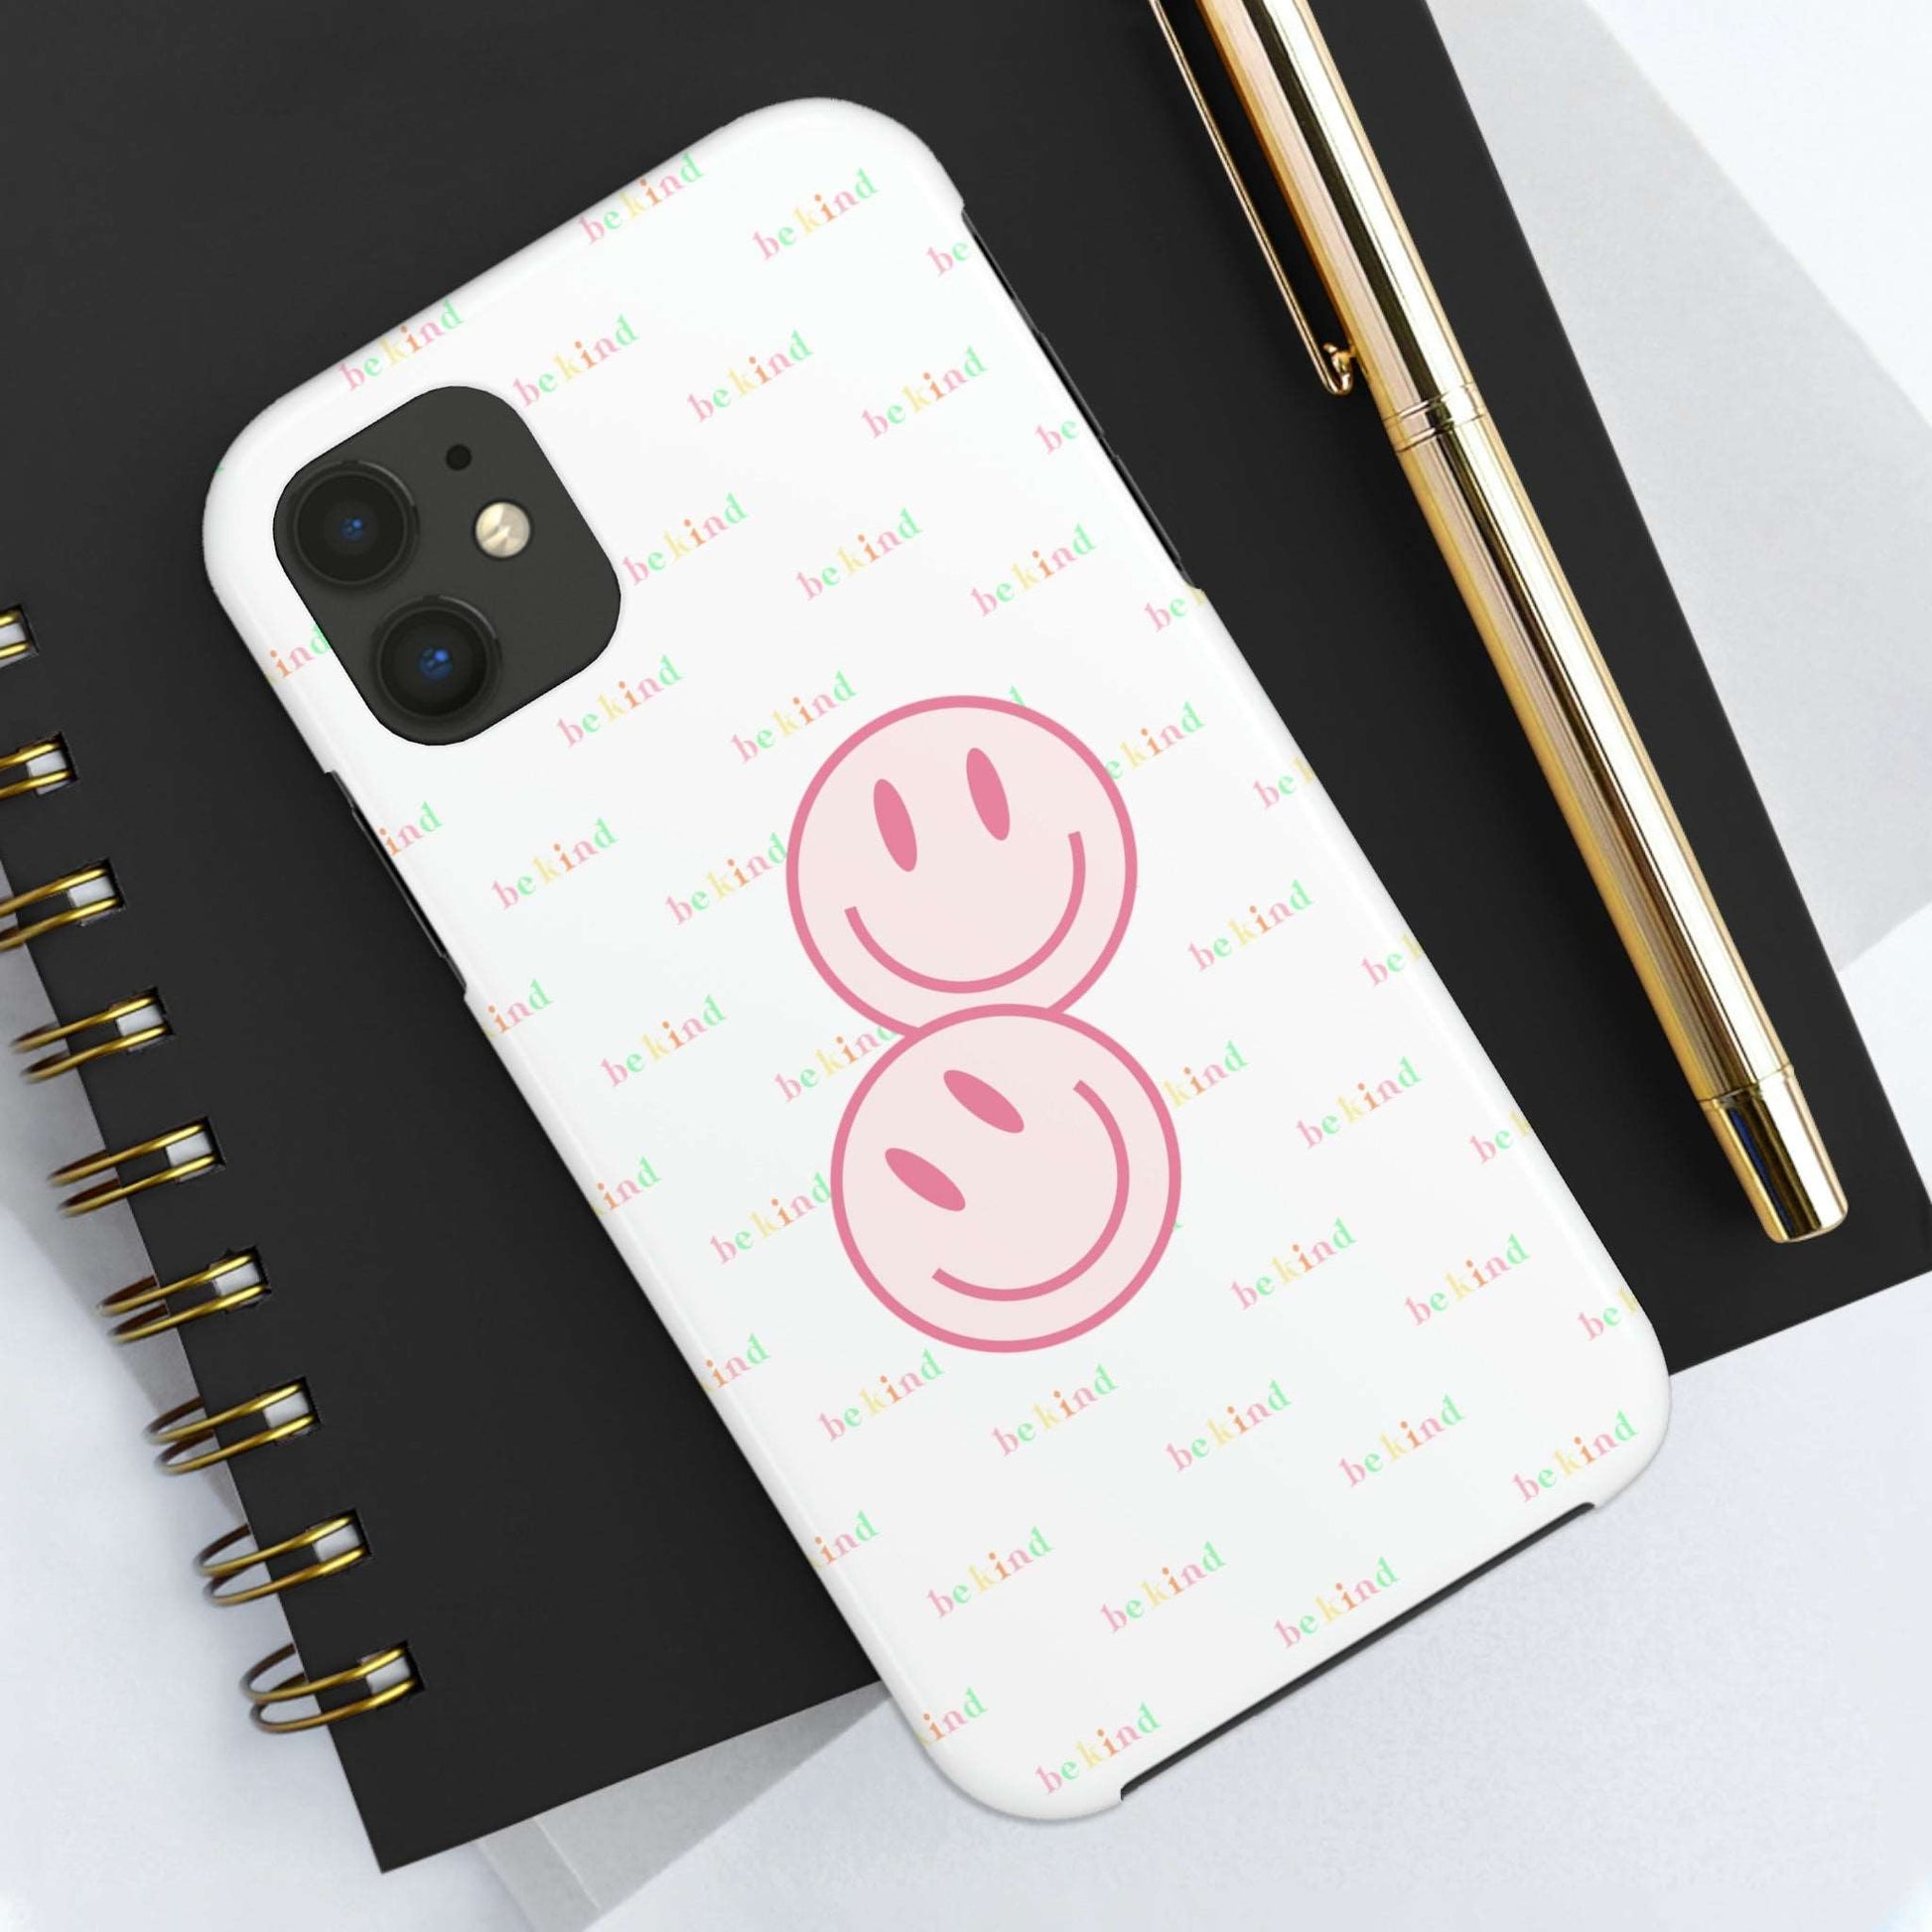 be kind and smile Phone Case